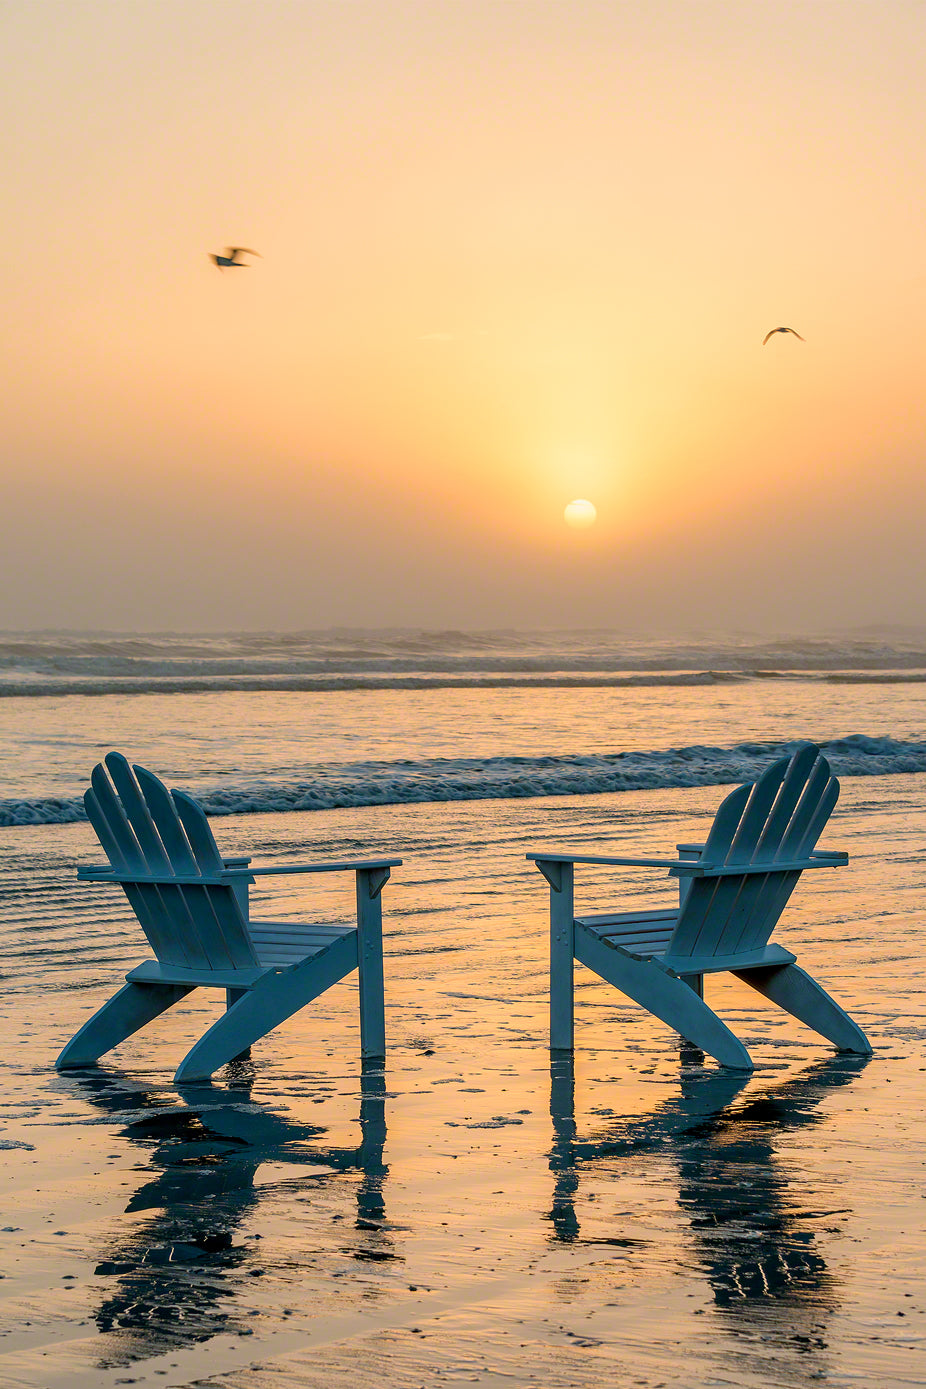 A photo of a pair of Adirondack Chairs on the beach at sunrise with sea fog